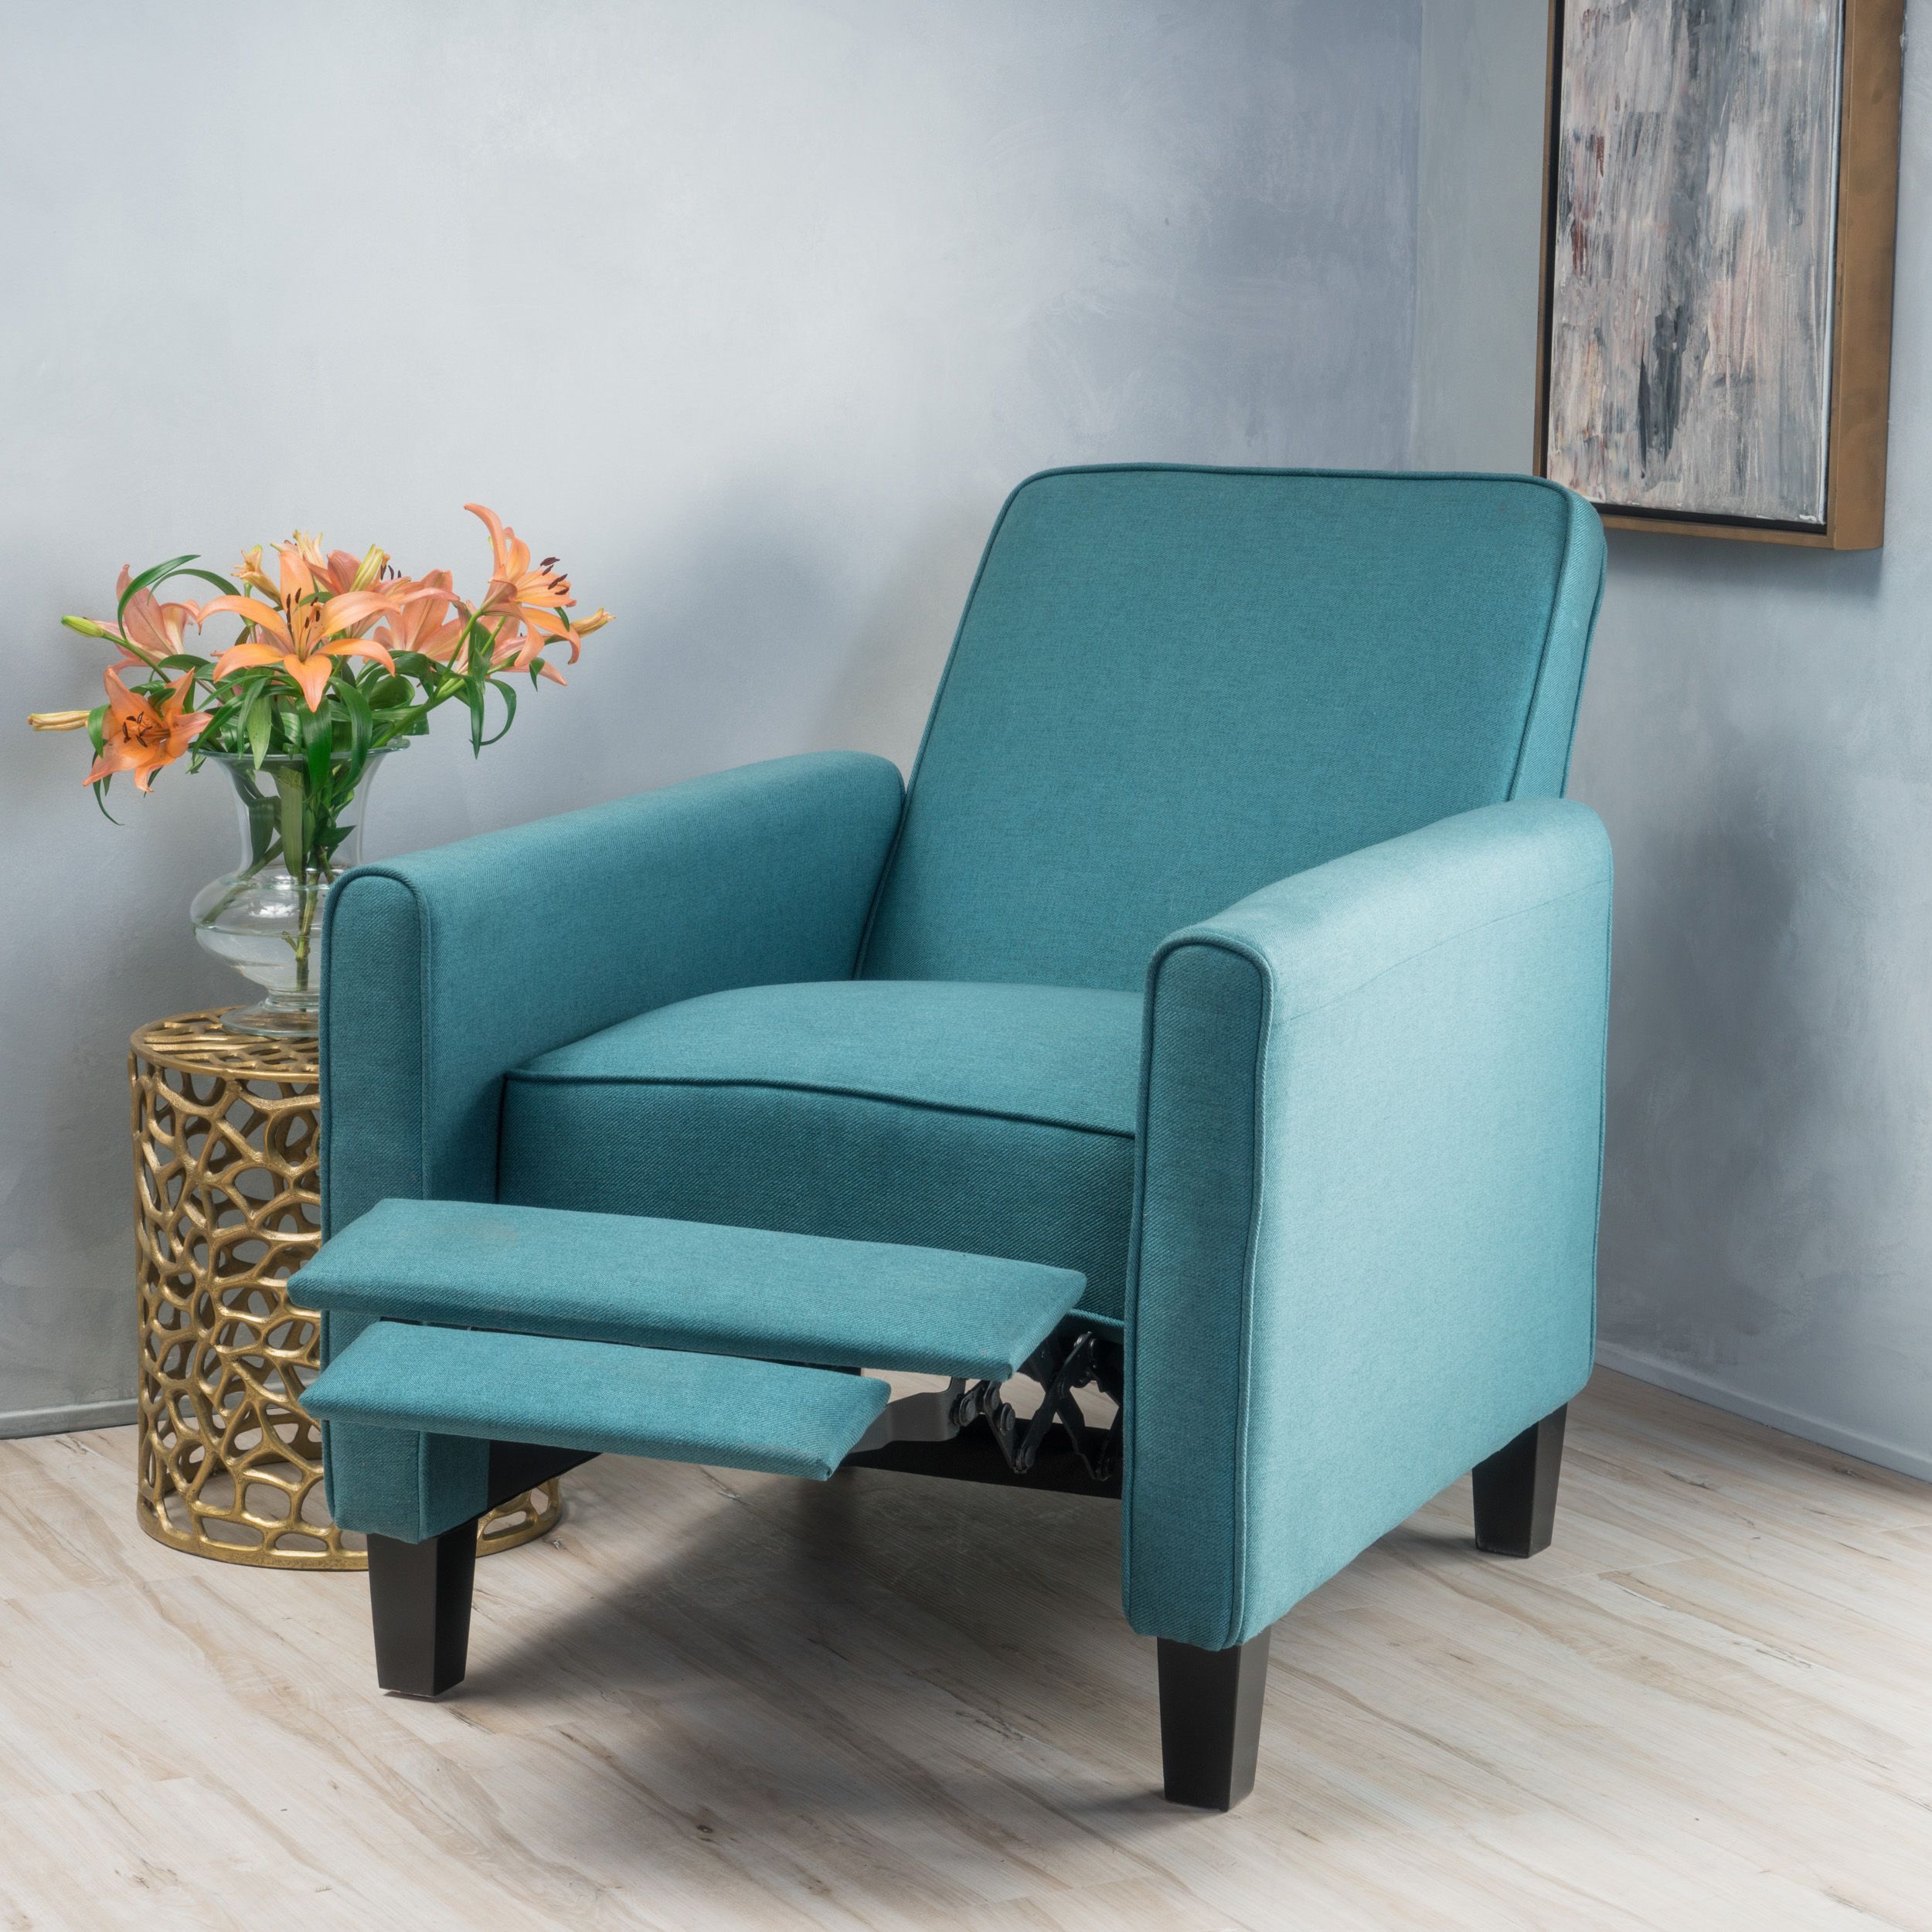 Noble House Arden Dark Teal Fabric Recliner Accent Chair – Walmart Throughout Dark Wood Outdoor Reclining Chairs (View 8 of 15)